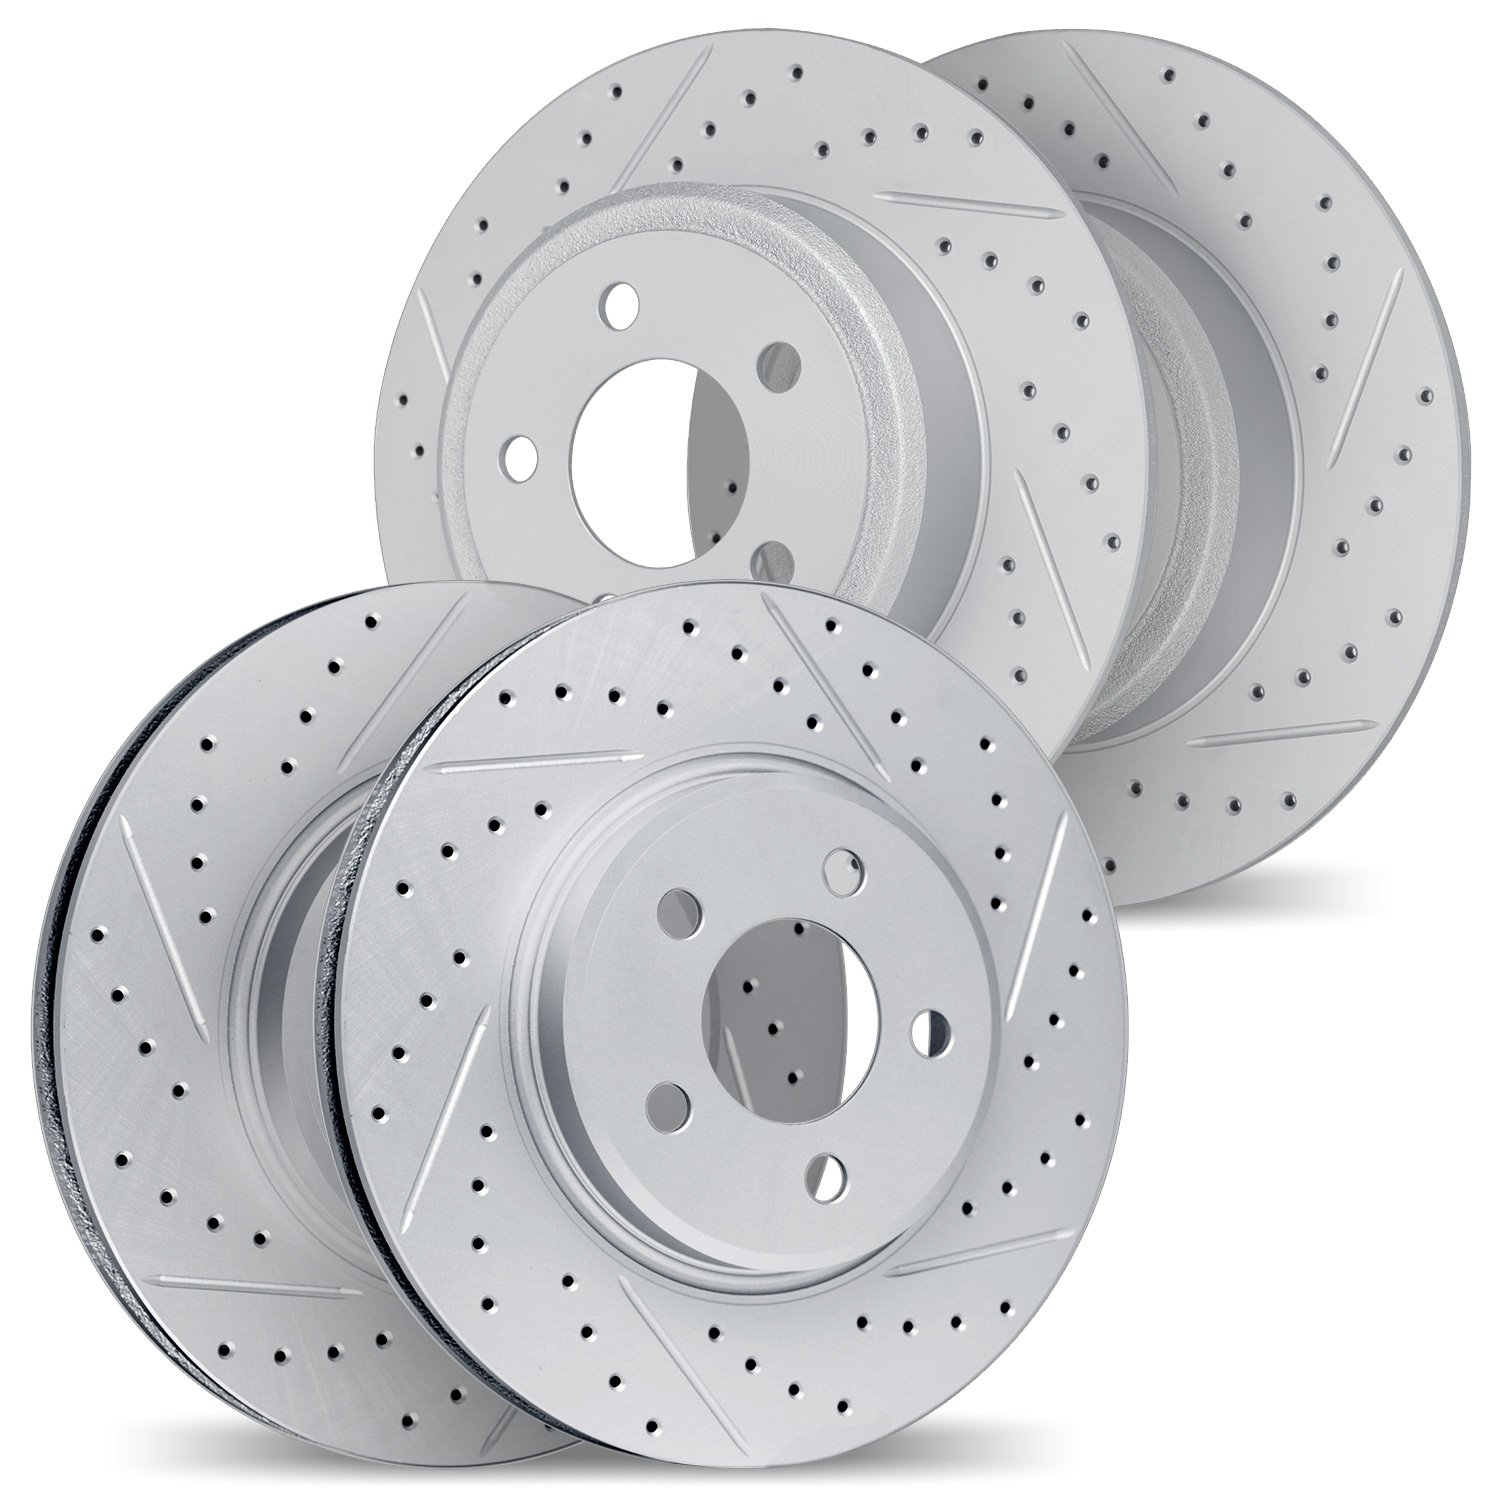 2004-59011 Geoperformance Drilled/Slotted Brake Rotors, 1991-1999 Multiple Makes/Models, Position: Front and Rear